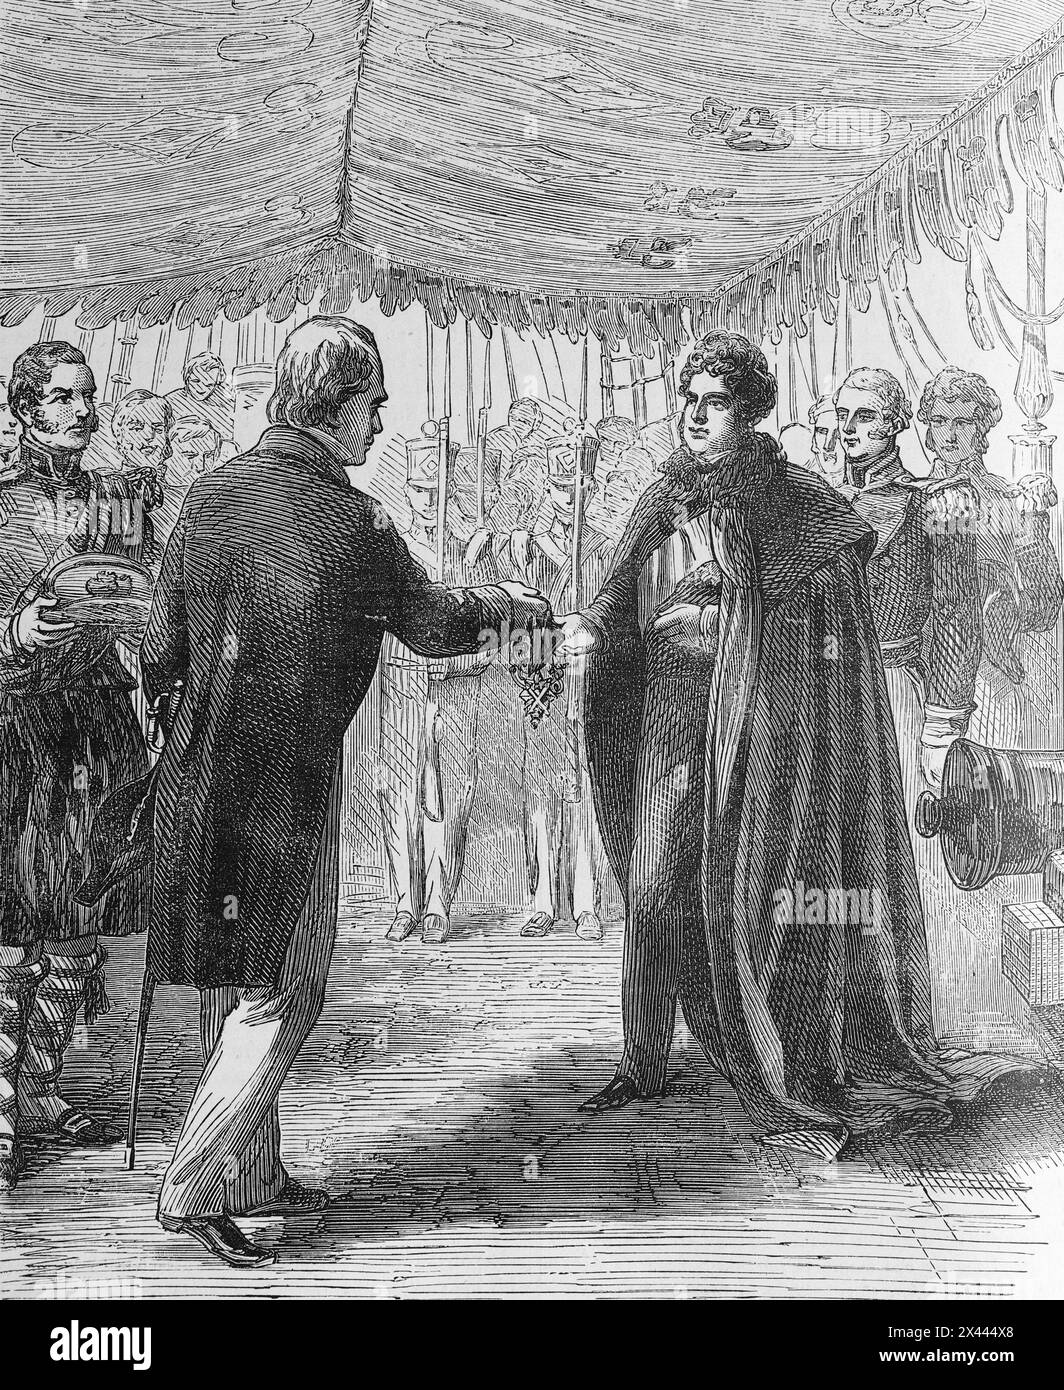 Sir Walter Scott presenting King George IV on his visit to Edinburgh, 15th August 1822. with the Cross of St Andrew, Illustration from Cassell's History of England, Vol VII. New Edition published Circa 1873-5. Stock Photo